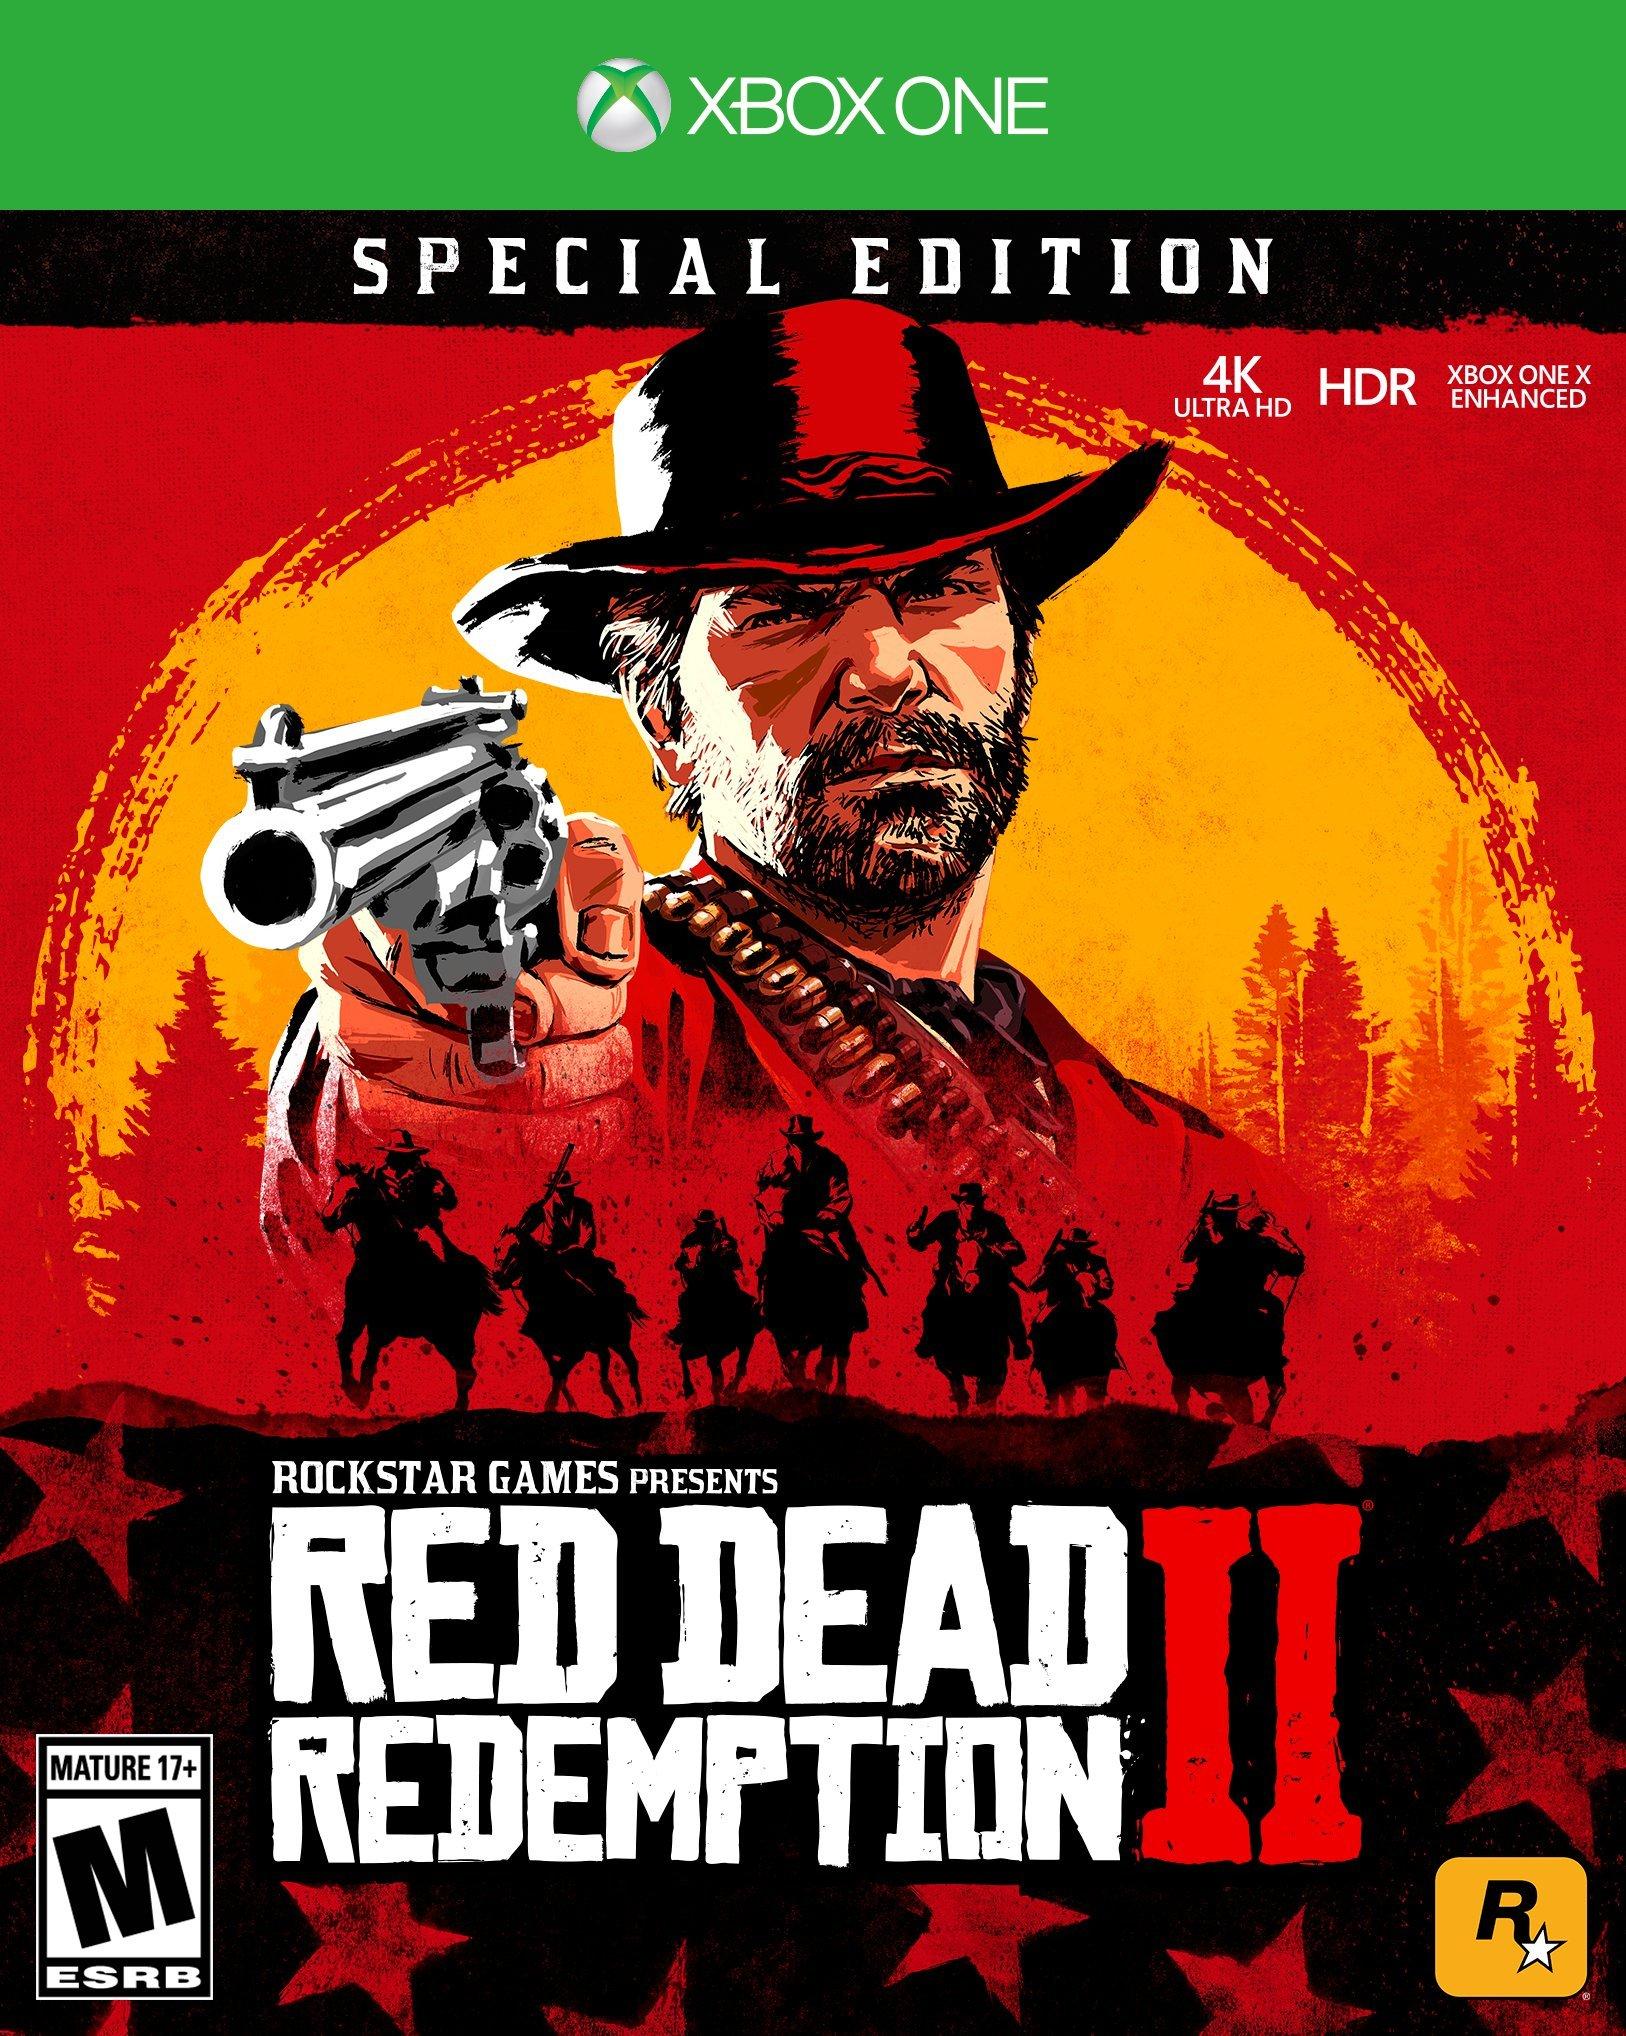 Microsoft XBOX 360 Red Dead Redemption System Bundle - video